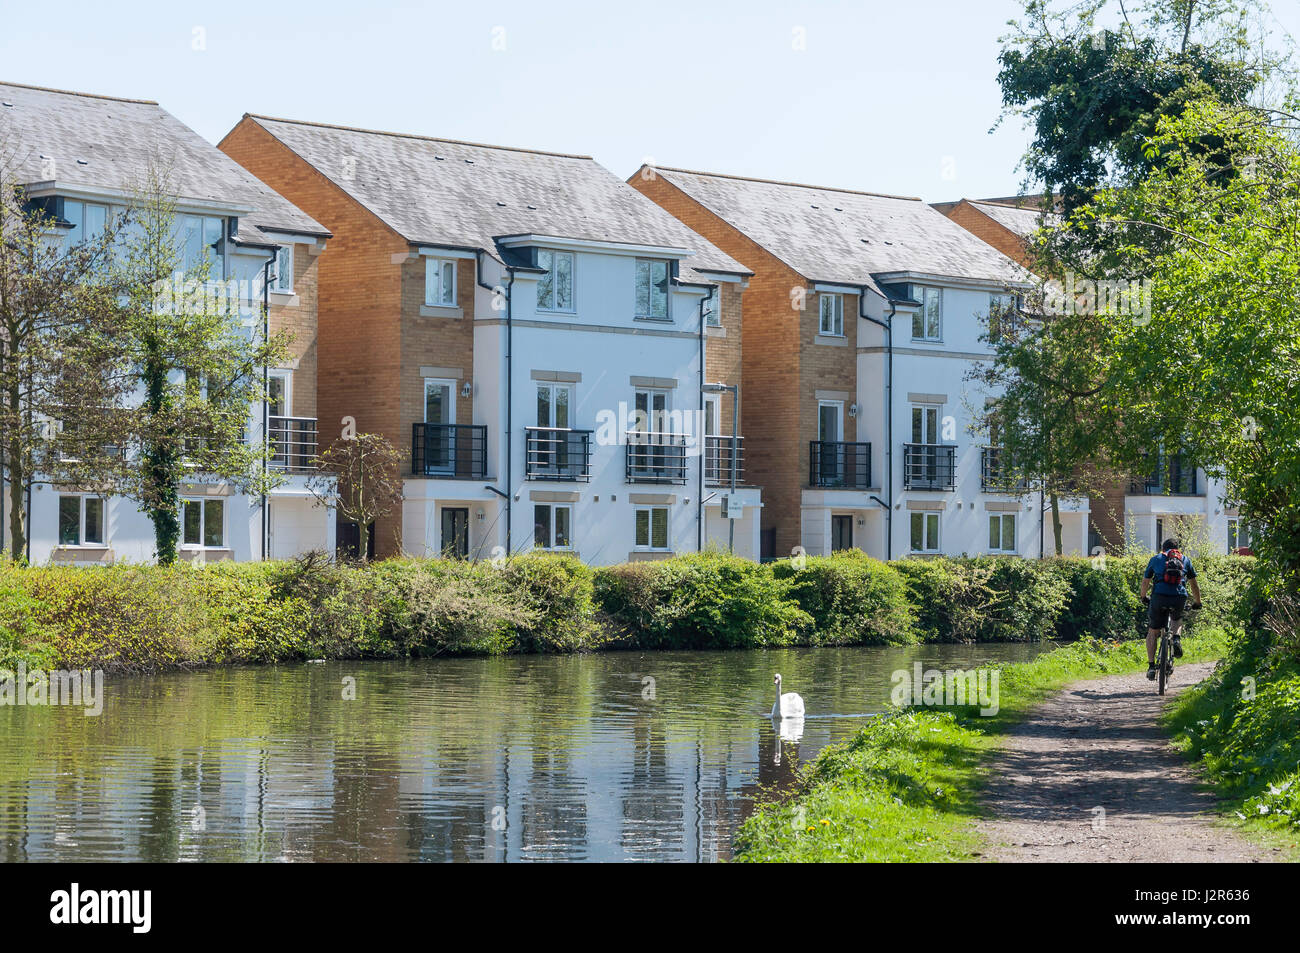 Cycle path and houses on Grand Union Canal, Kings Langley, Hertfordshire, England, United Kingdom Stock Photo